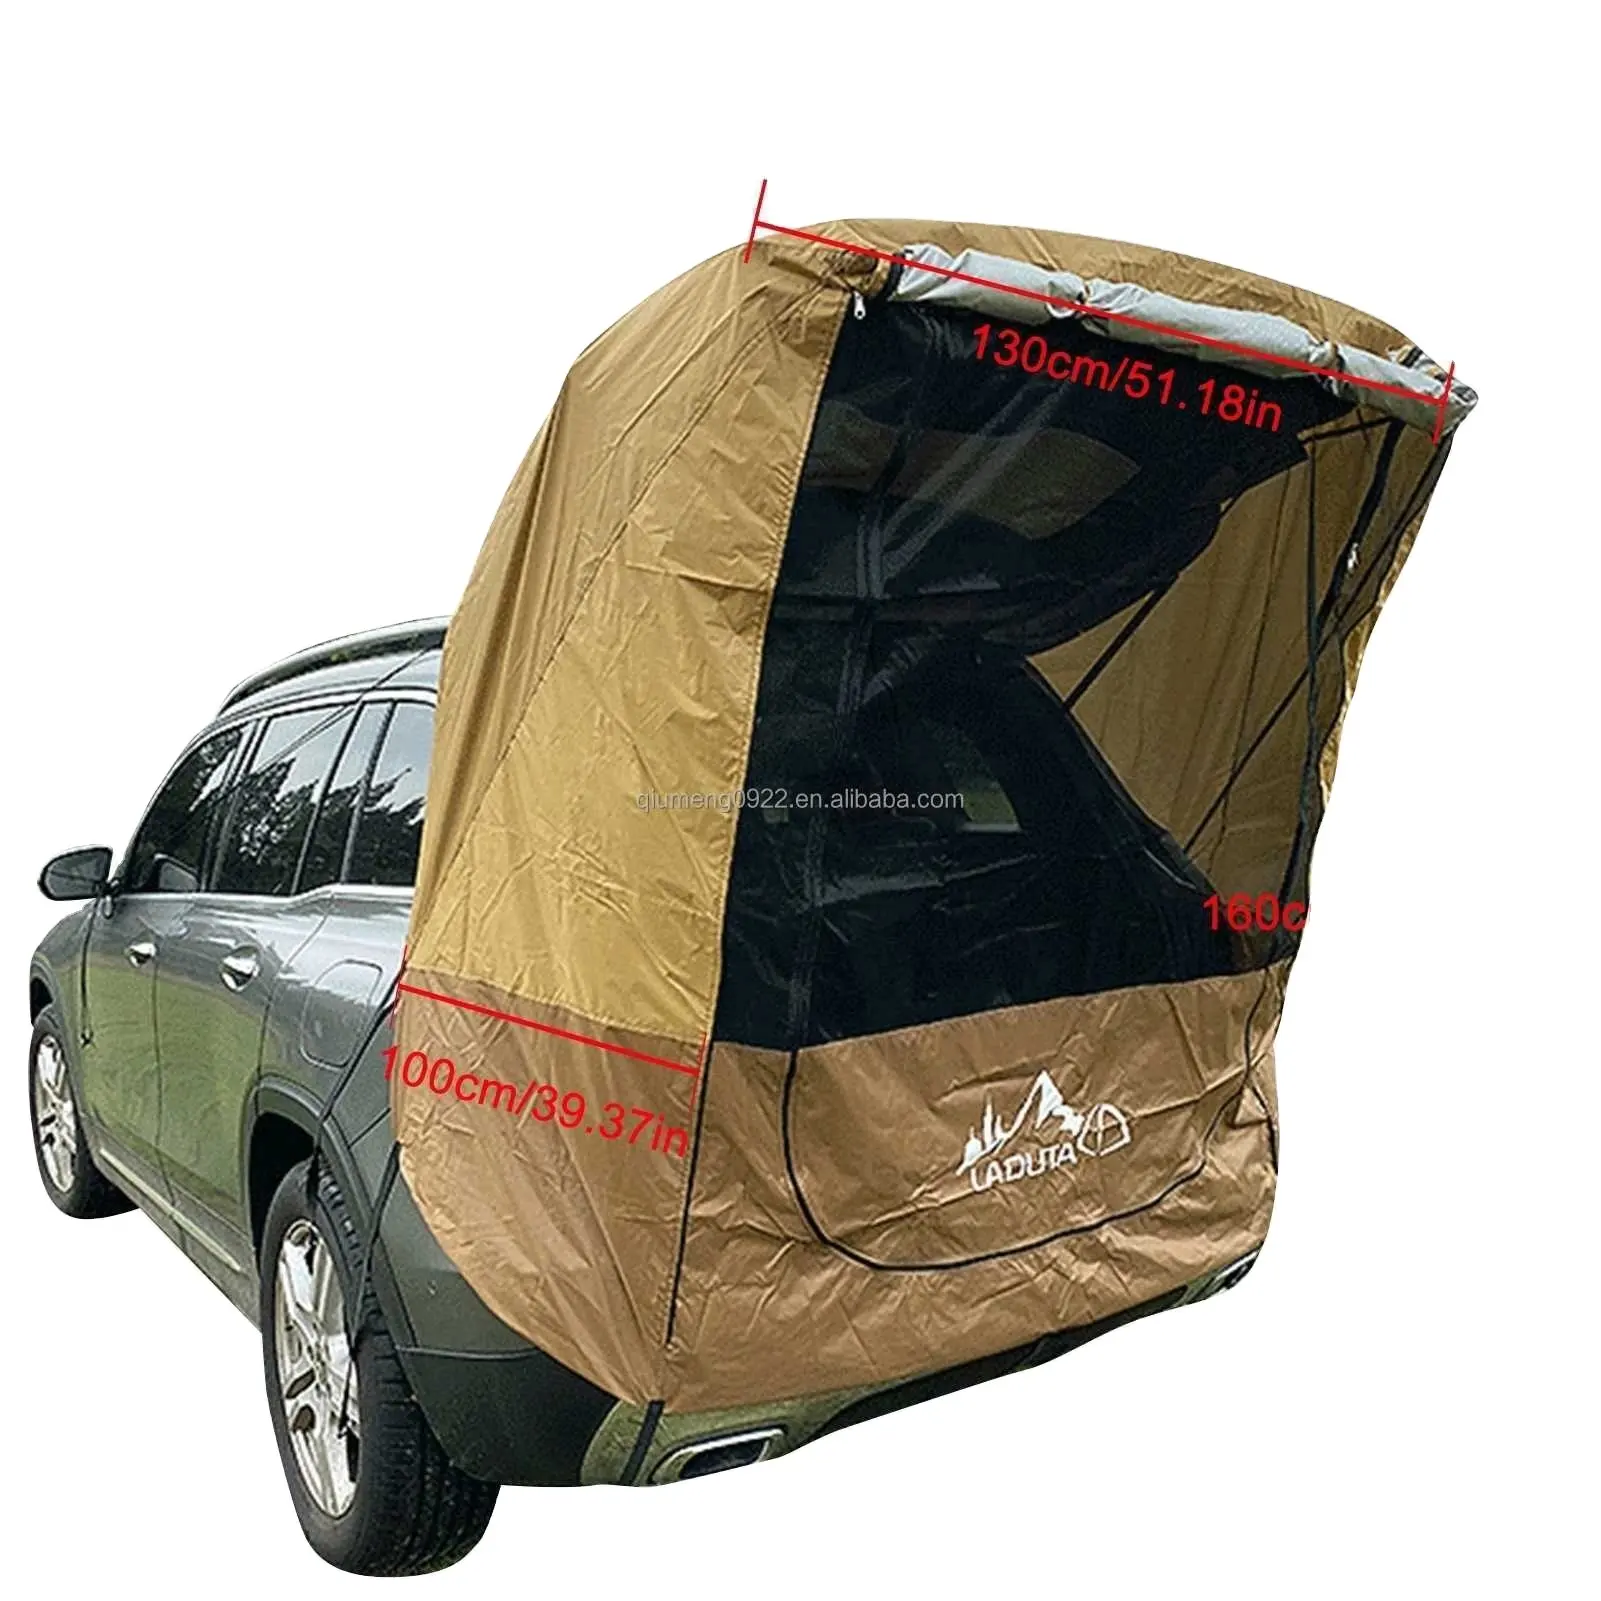 Car Trunk Shade Awning Tent for Outdoor Camping Travel Car Waterproof Tailgate Shade Awning Sunshade Tent